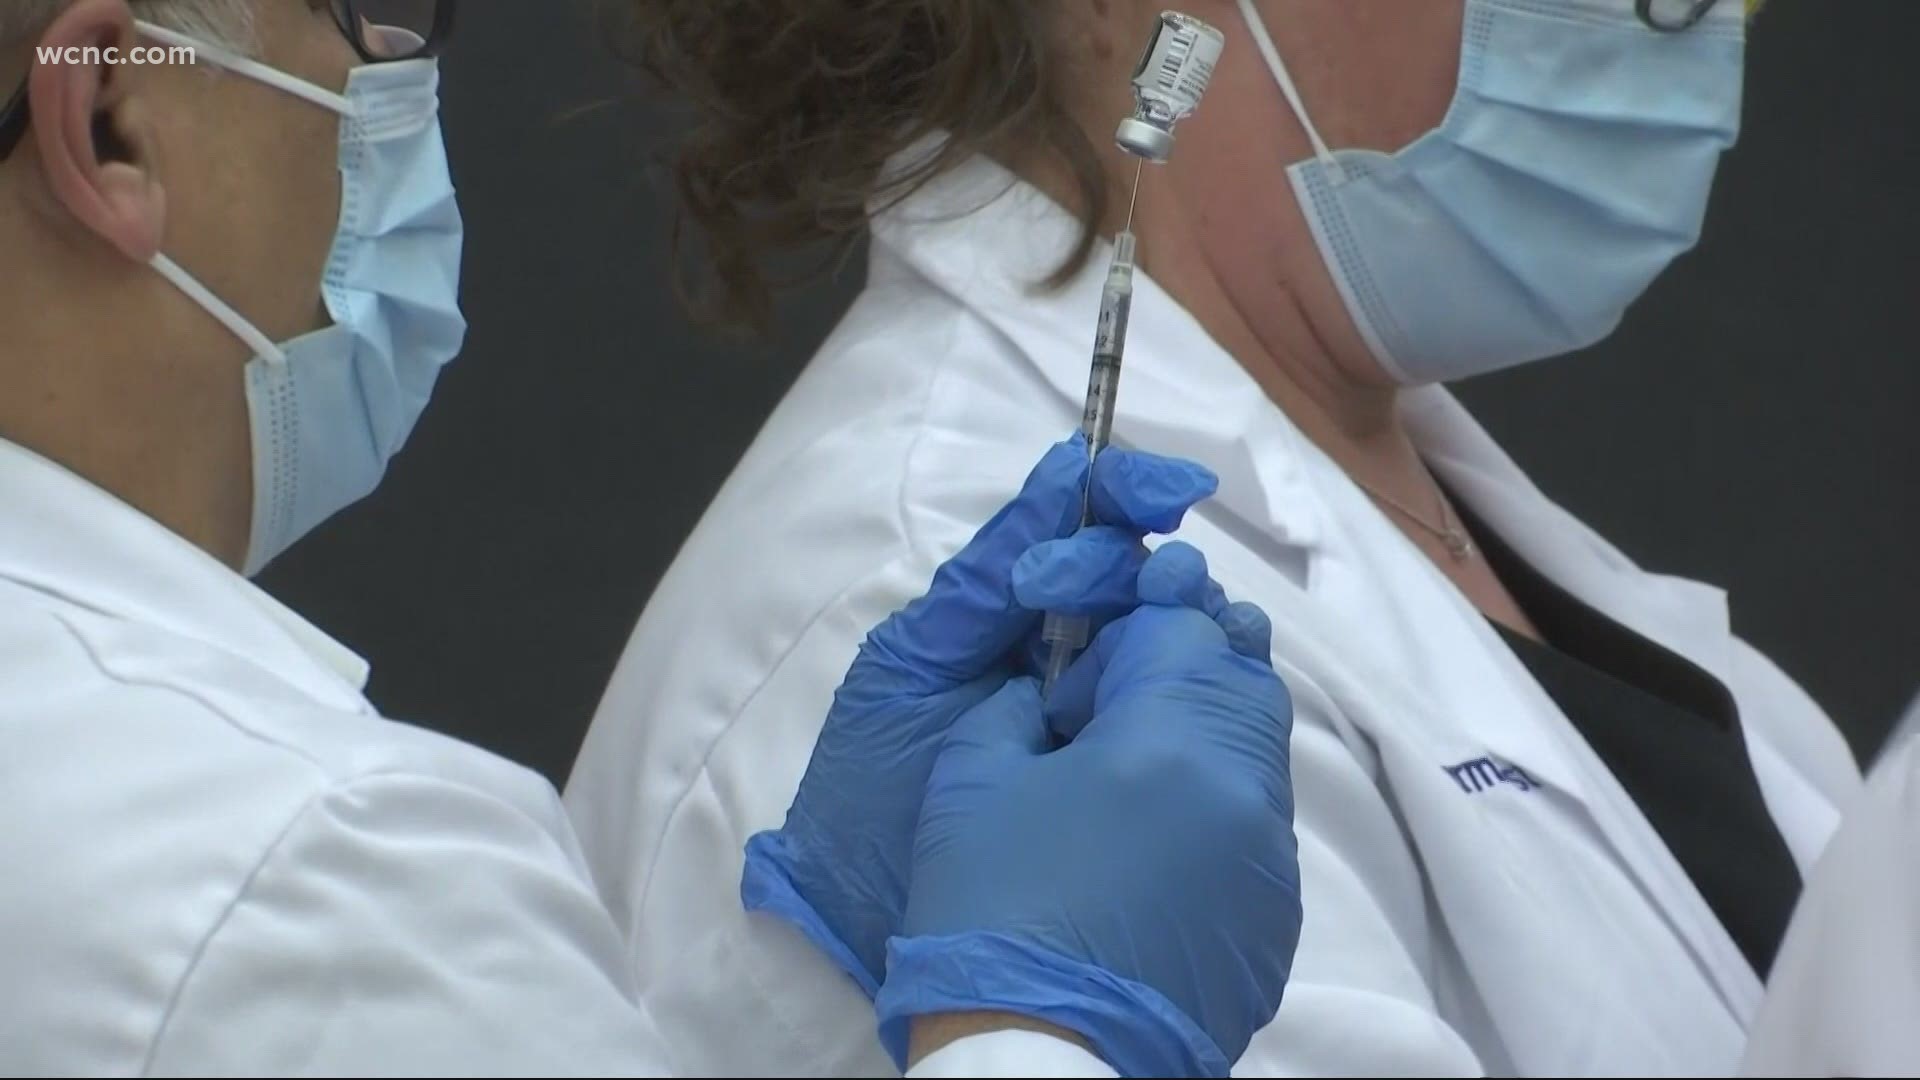 Atrium said they plan to vaccinate up to 14,000 people at the 3-day clinic in Bank of America Stadium.